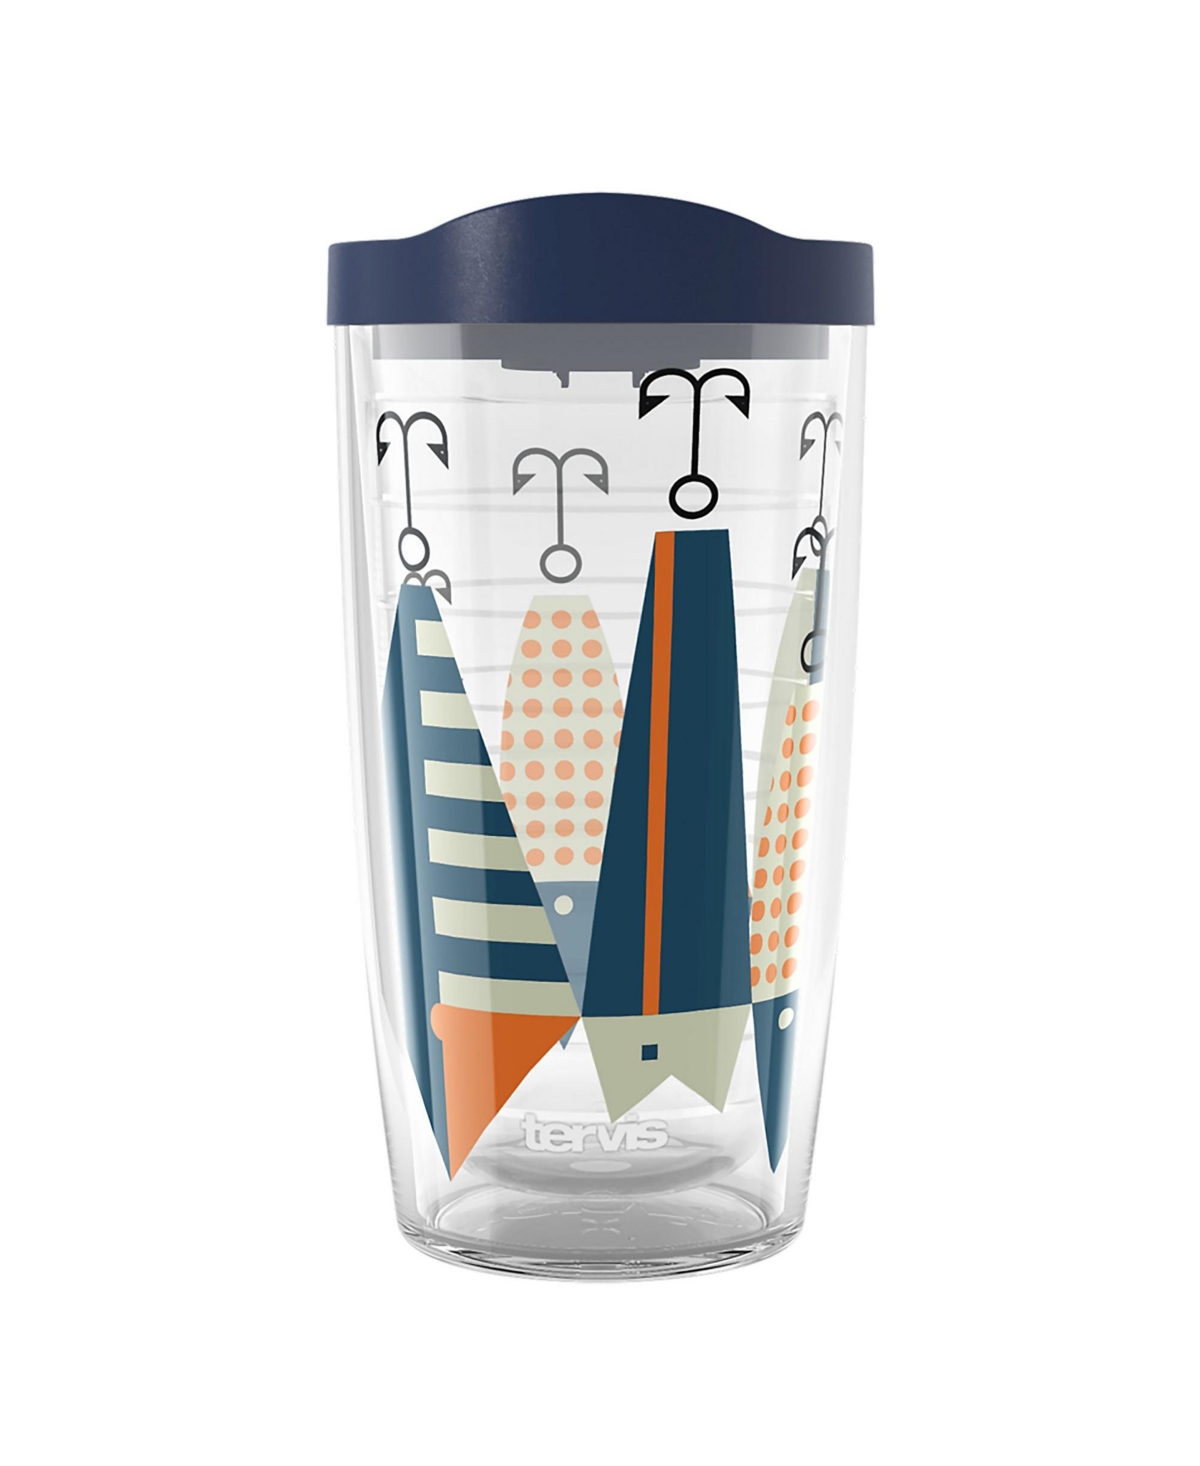 Tervis Tumbler Tervis Fishing Heavy Tackle Made In Usa Double Walled Insulated Tumbler Travel Cup Keeps Drinks Cold In Open Miscellaneous